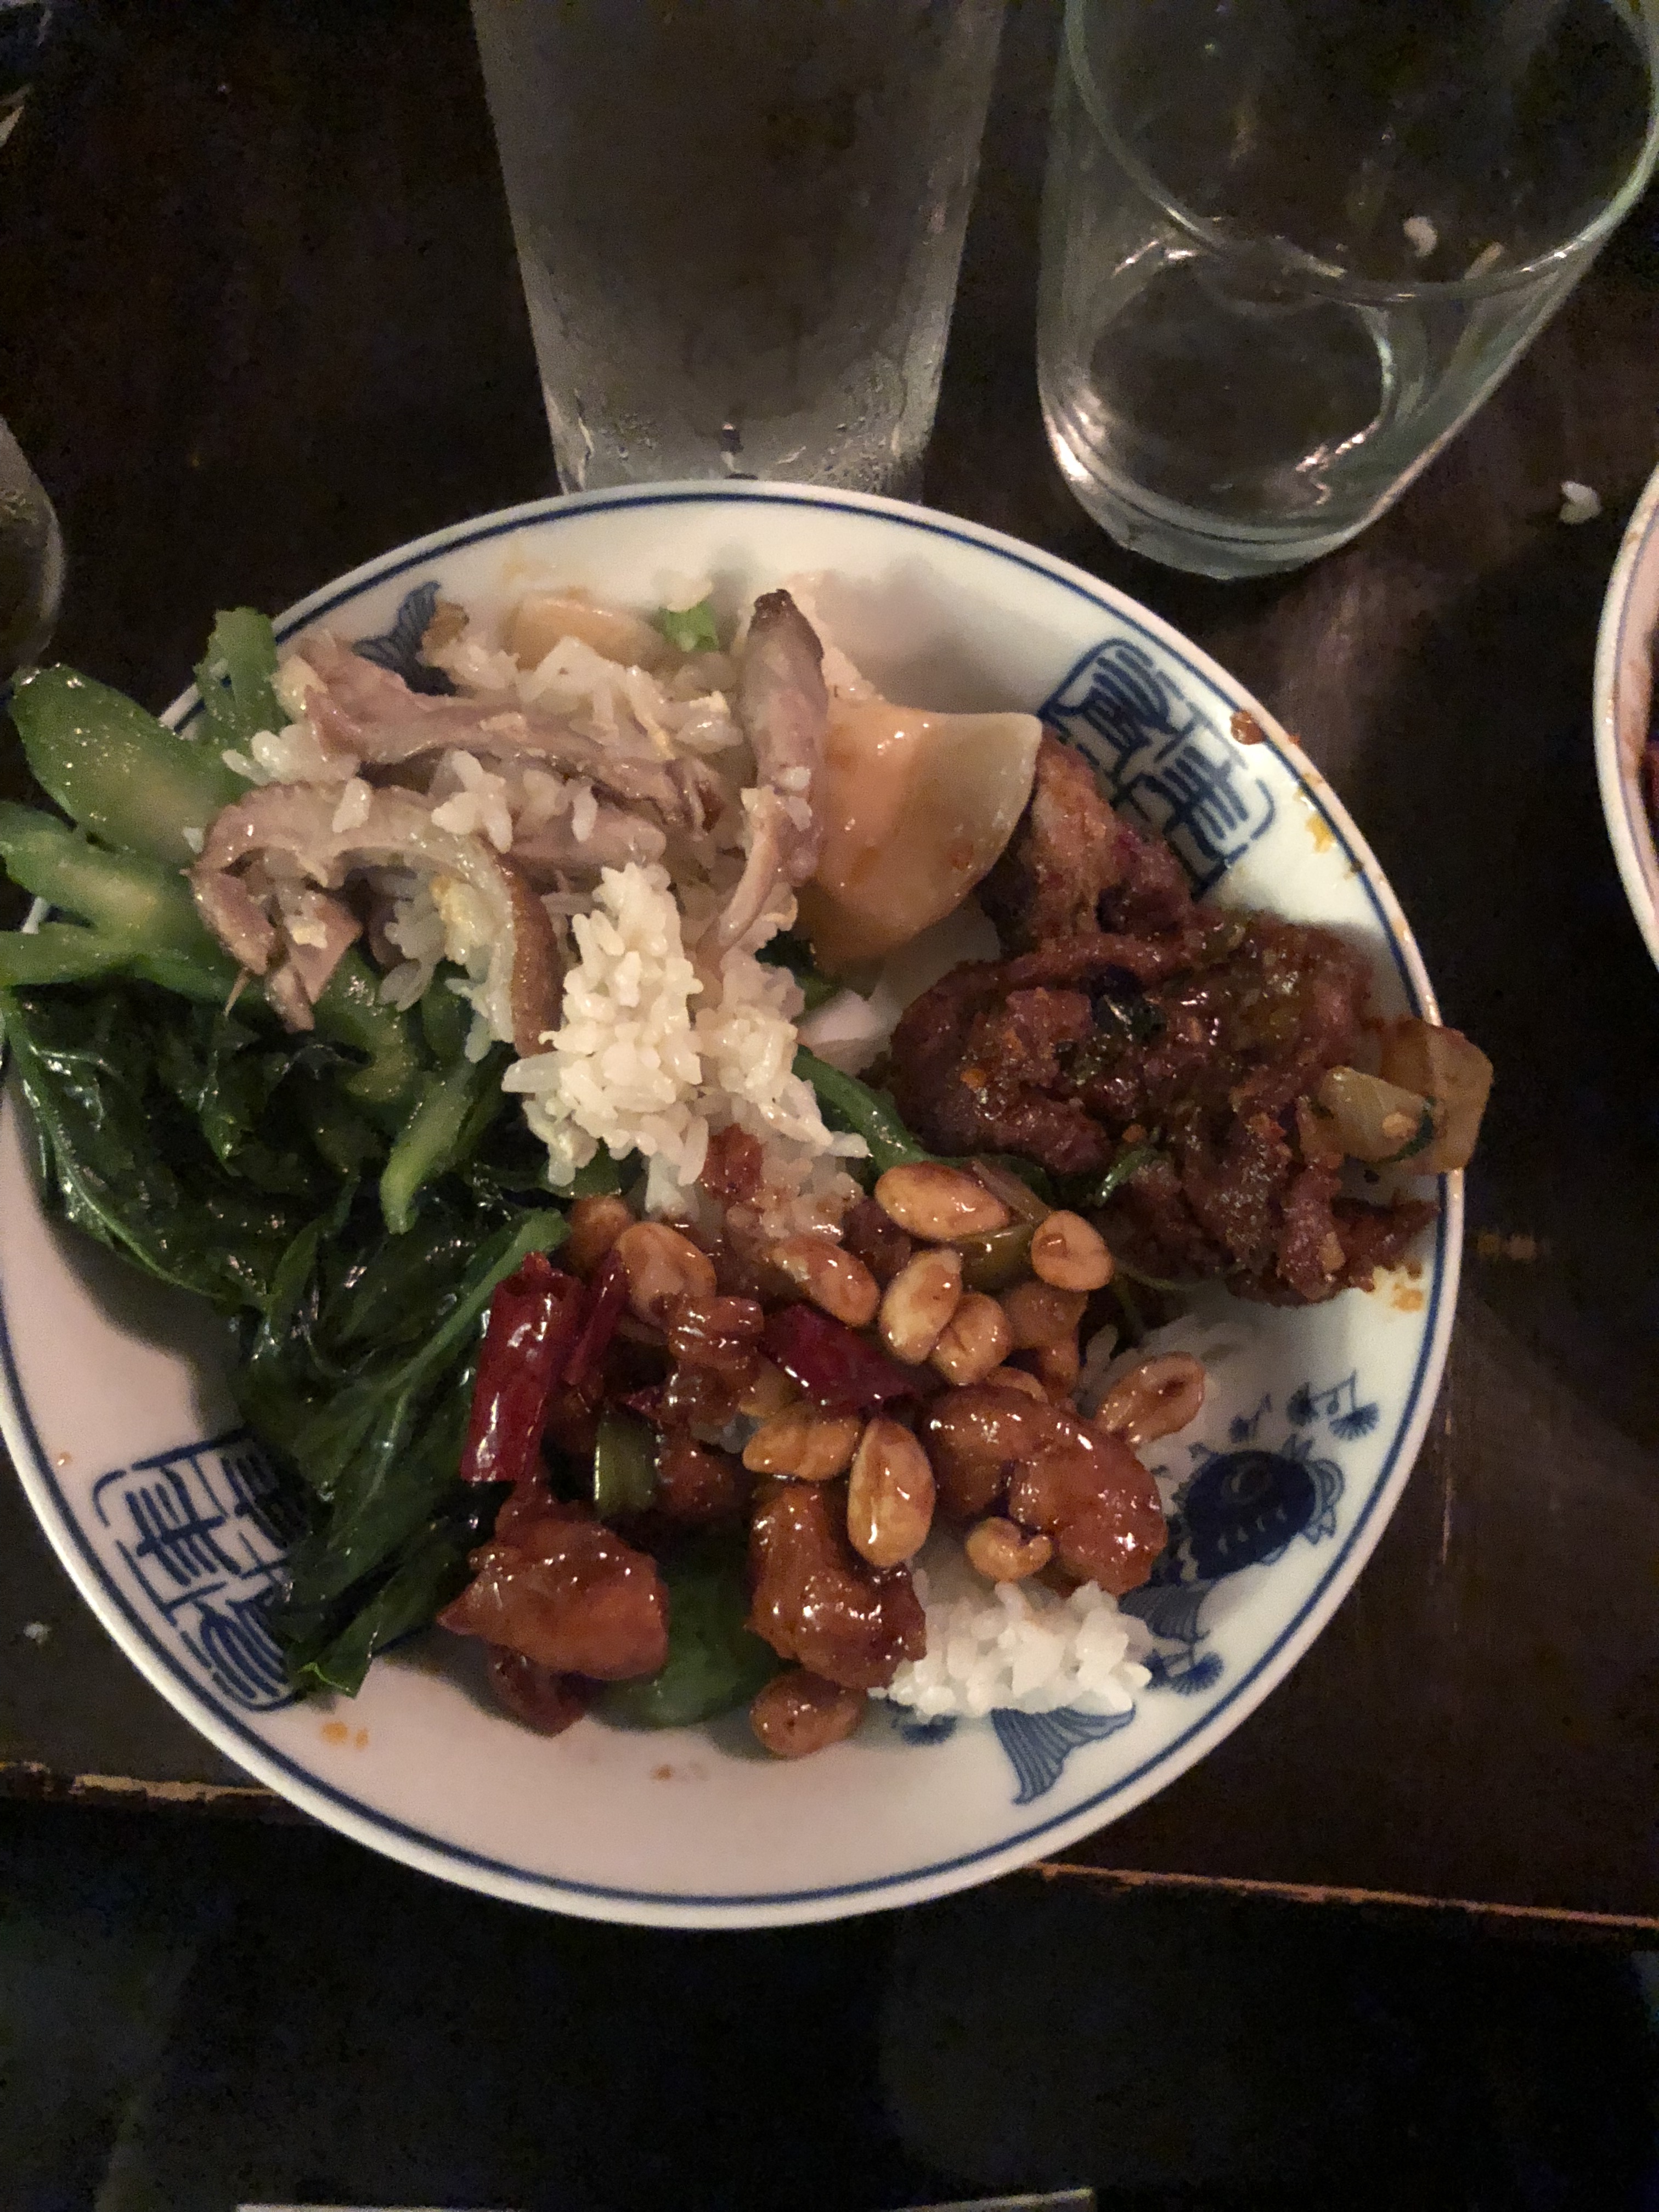 An image of Chinese food. Photo Credit: Anna B.